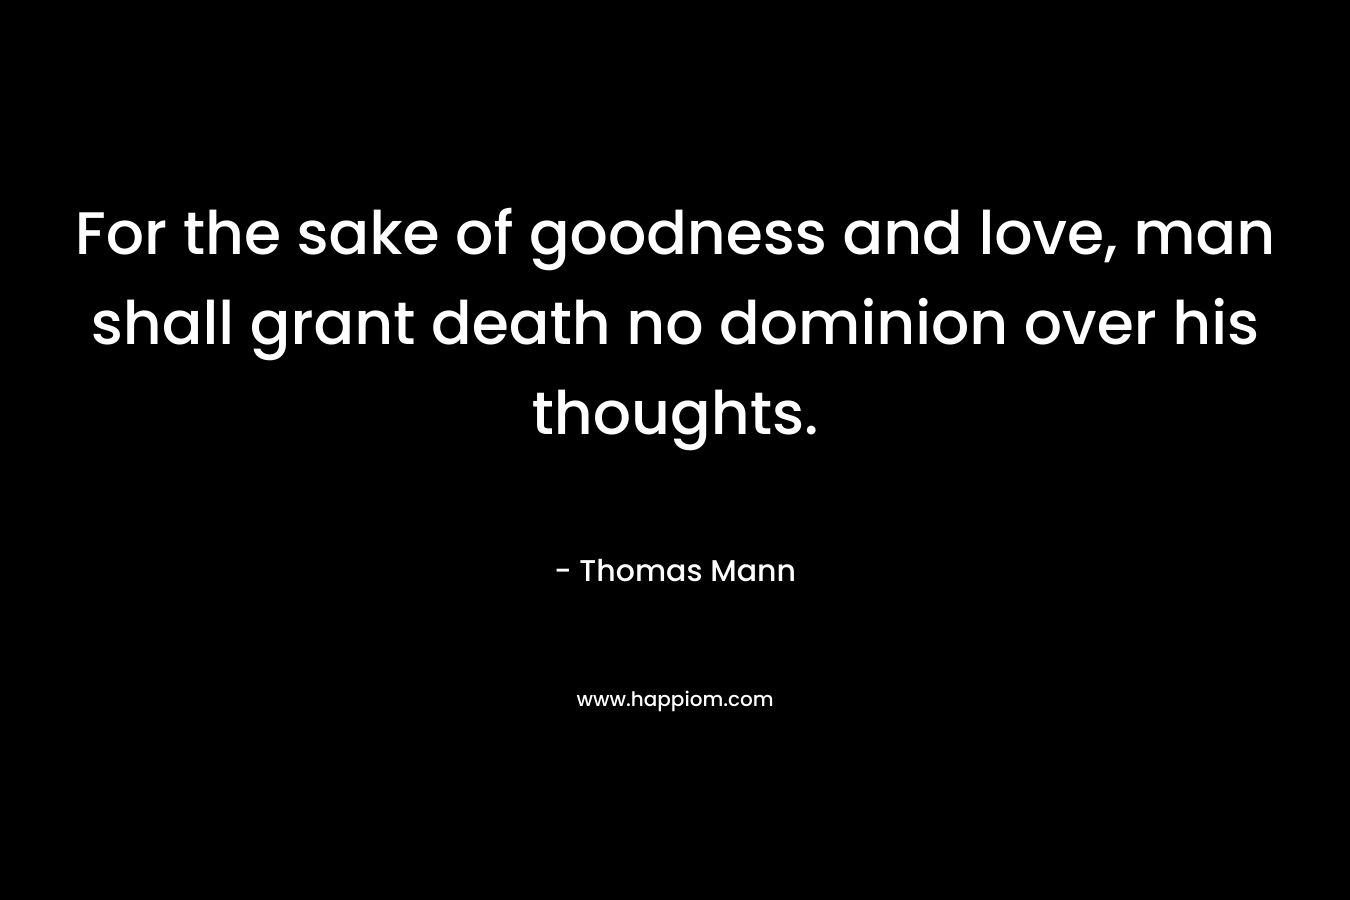 For the sake of goodness and love, man shall grant death no dominion over his thoughts.